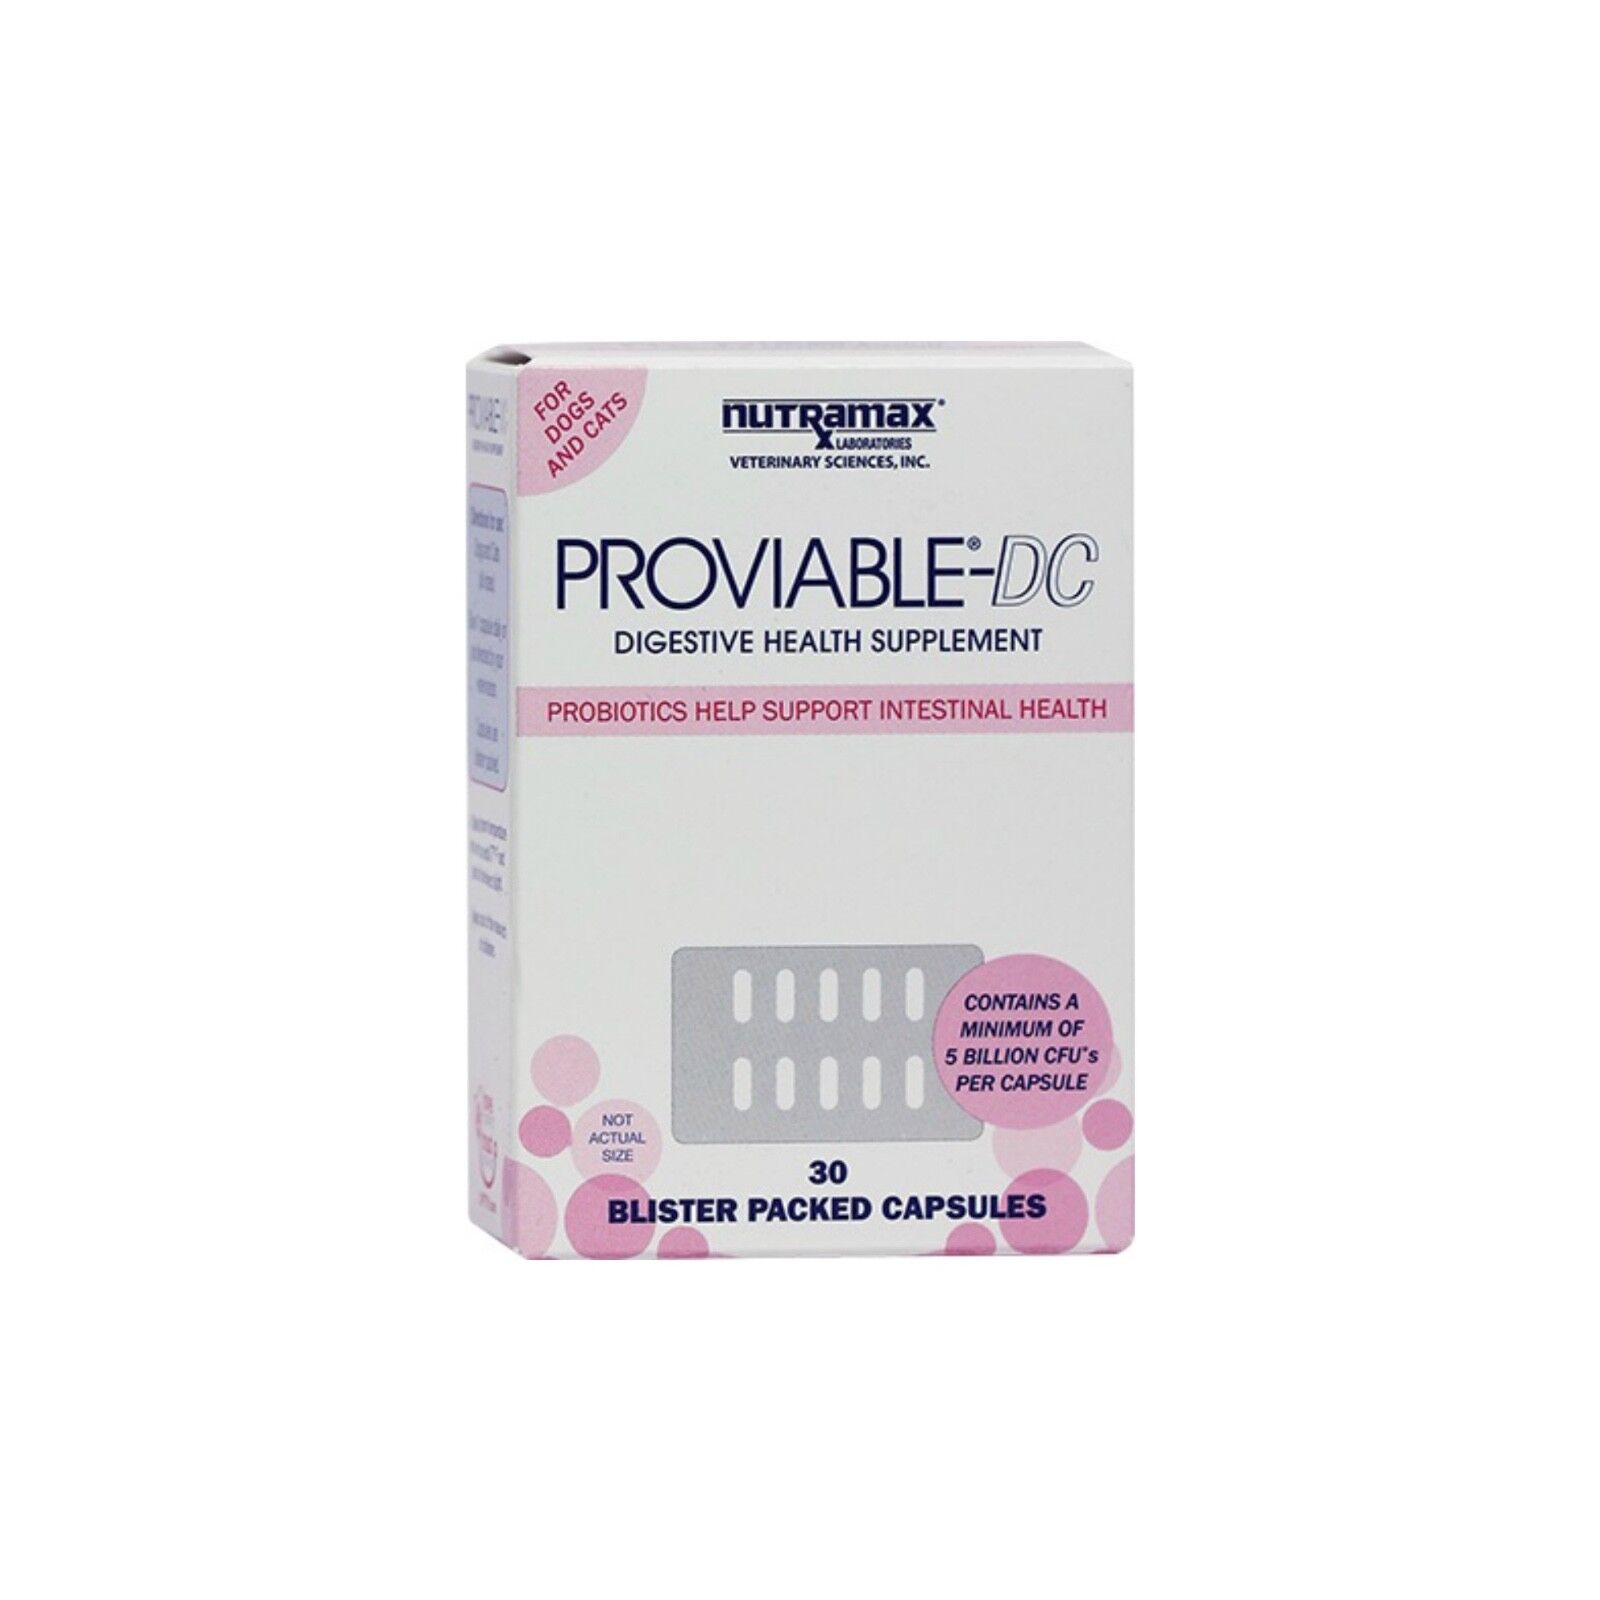 Nutramax Proviable-DC Probiotic Digestive Support for Dogs & Cats 30 Capsules